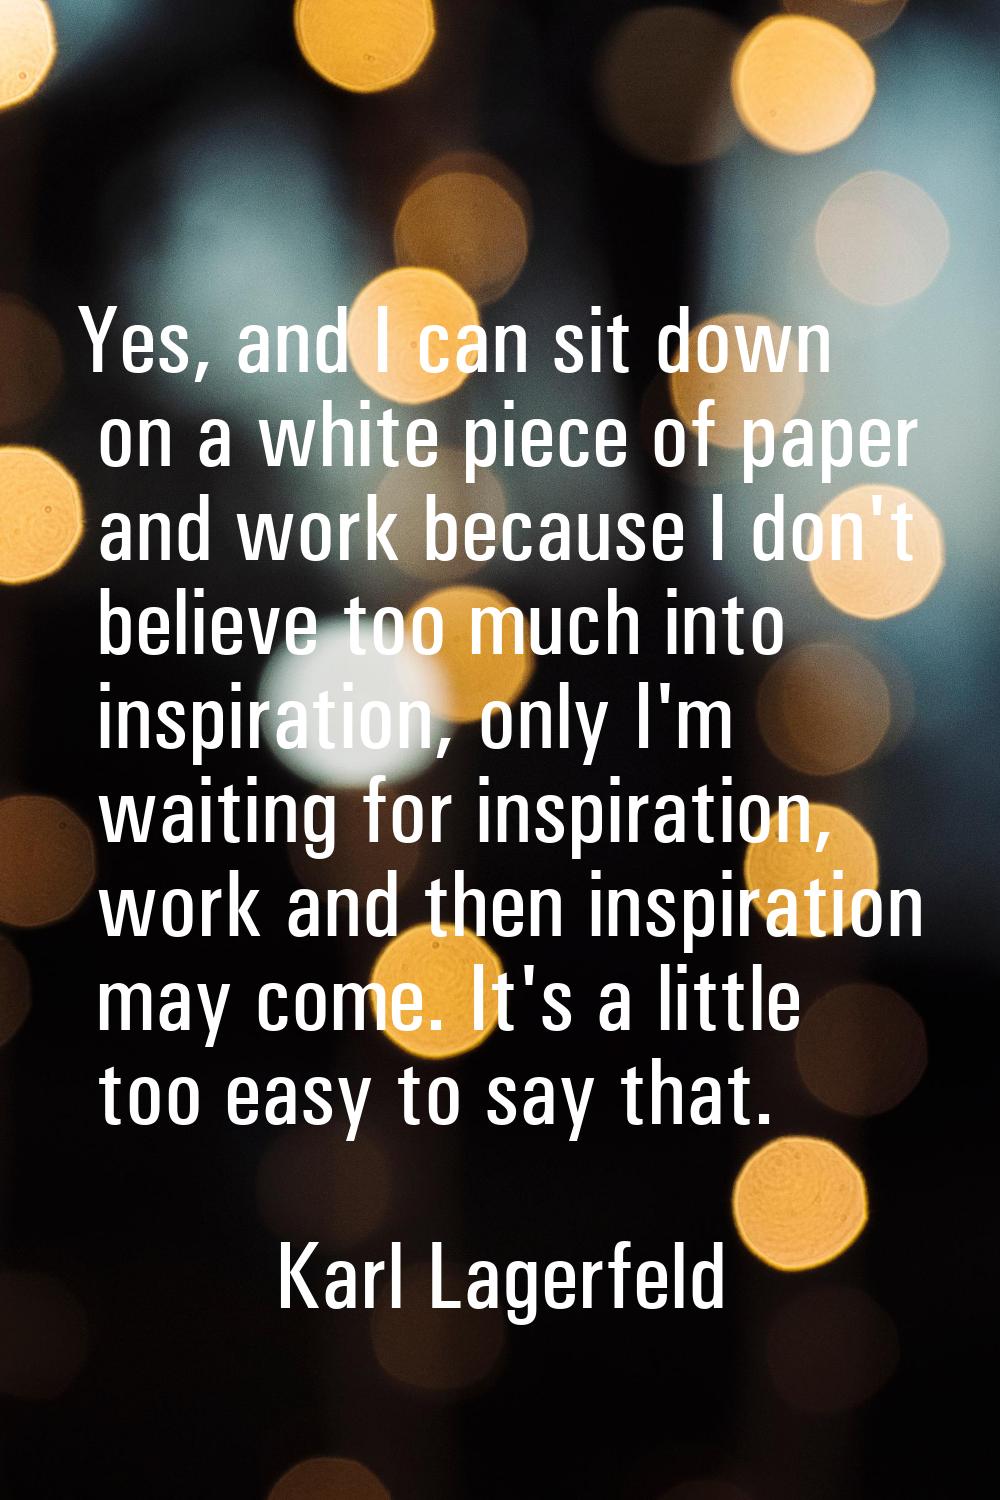 Yes, and I can sit down on a white piece of paper and work because I don't believe too much into in